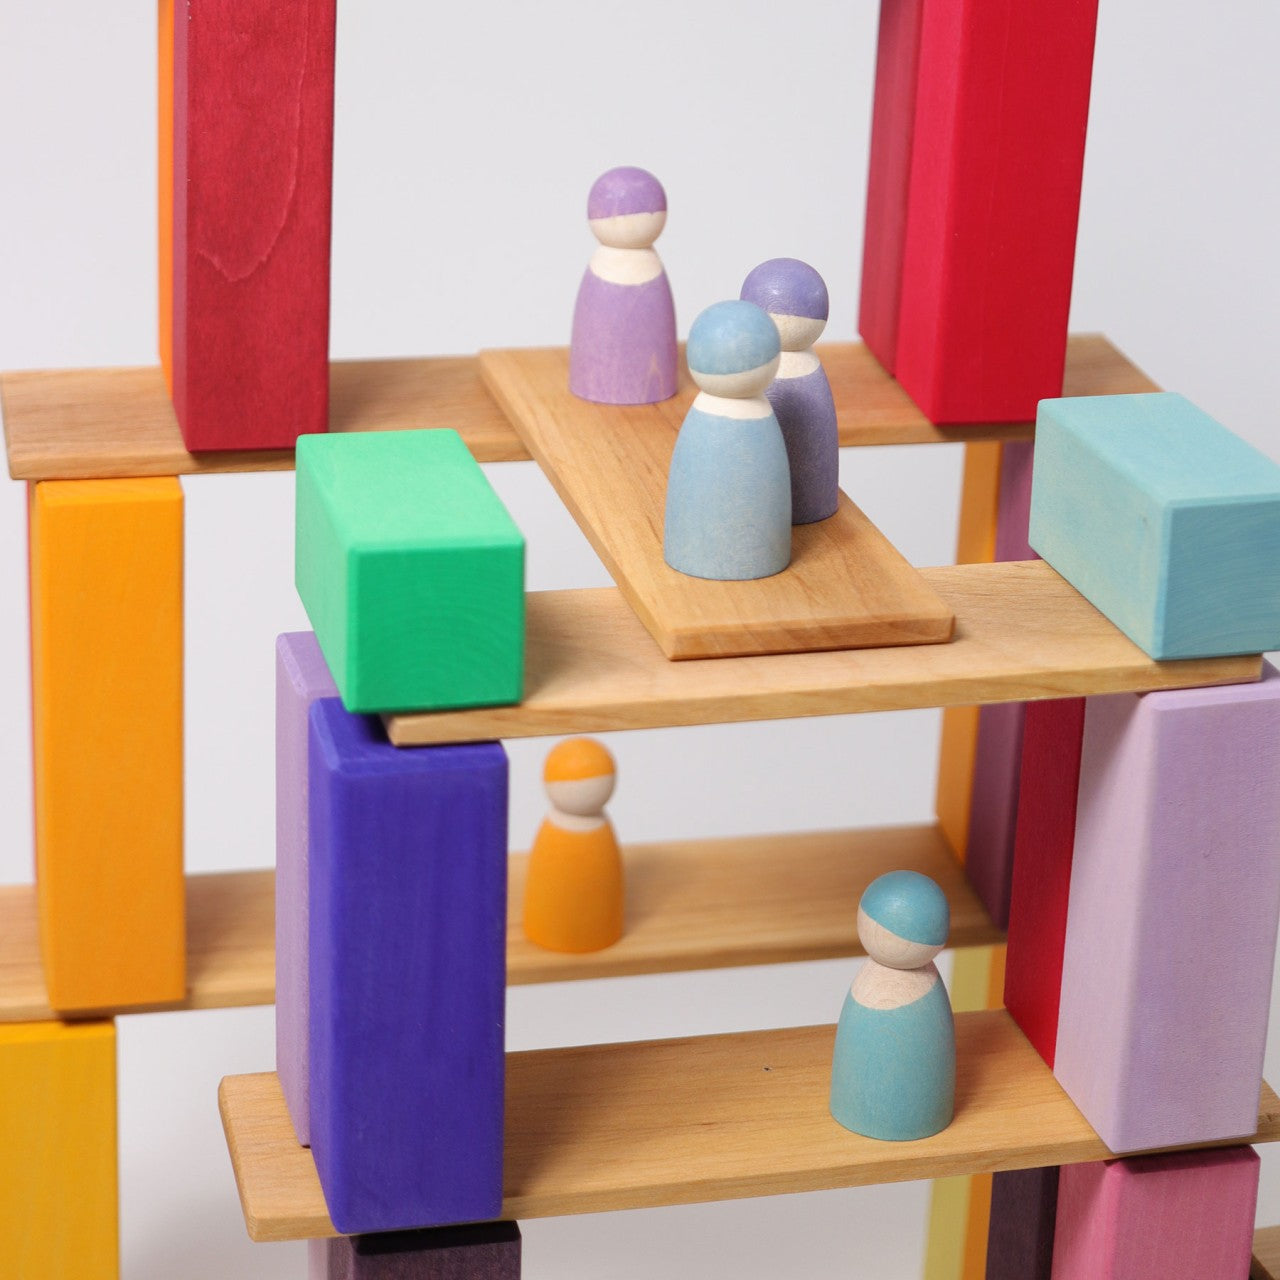 12 Pastel Friends | Wooden Toy Figures | Open-Ended Play